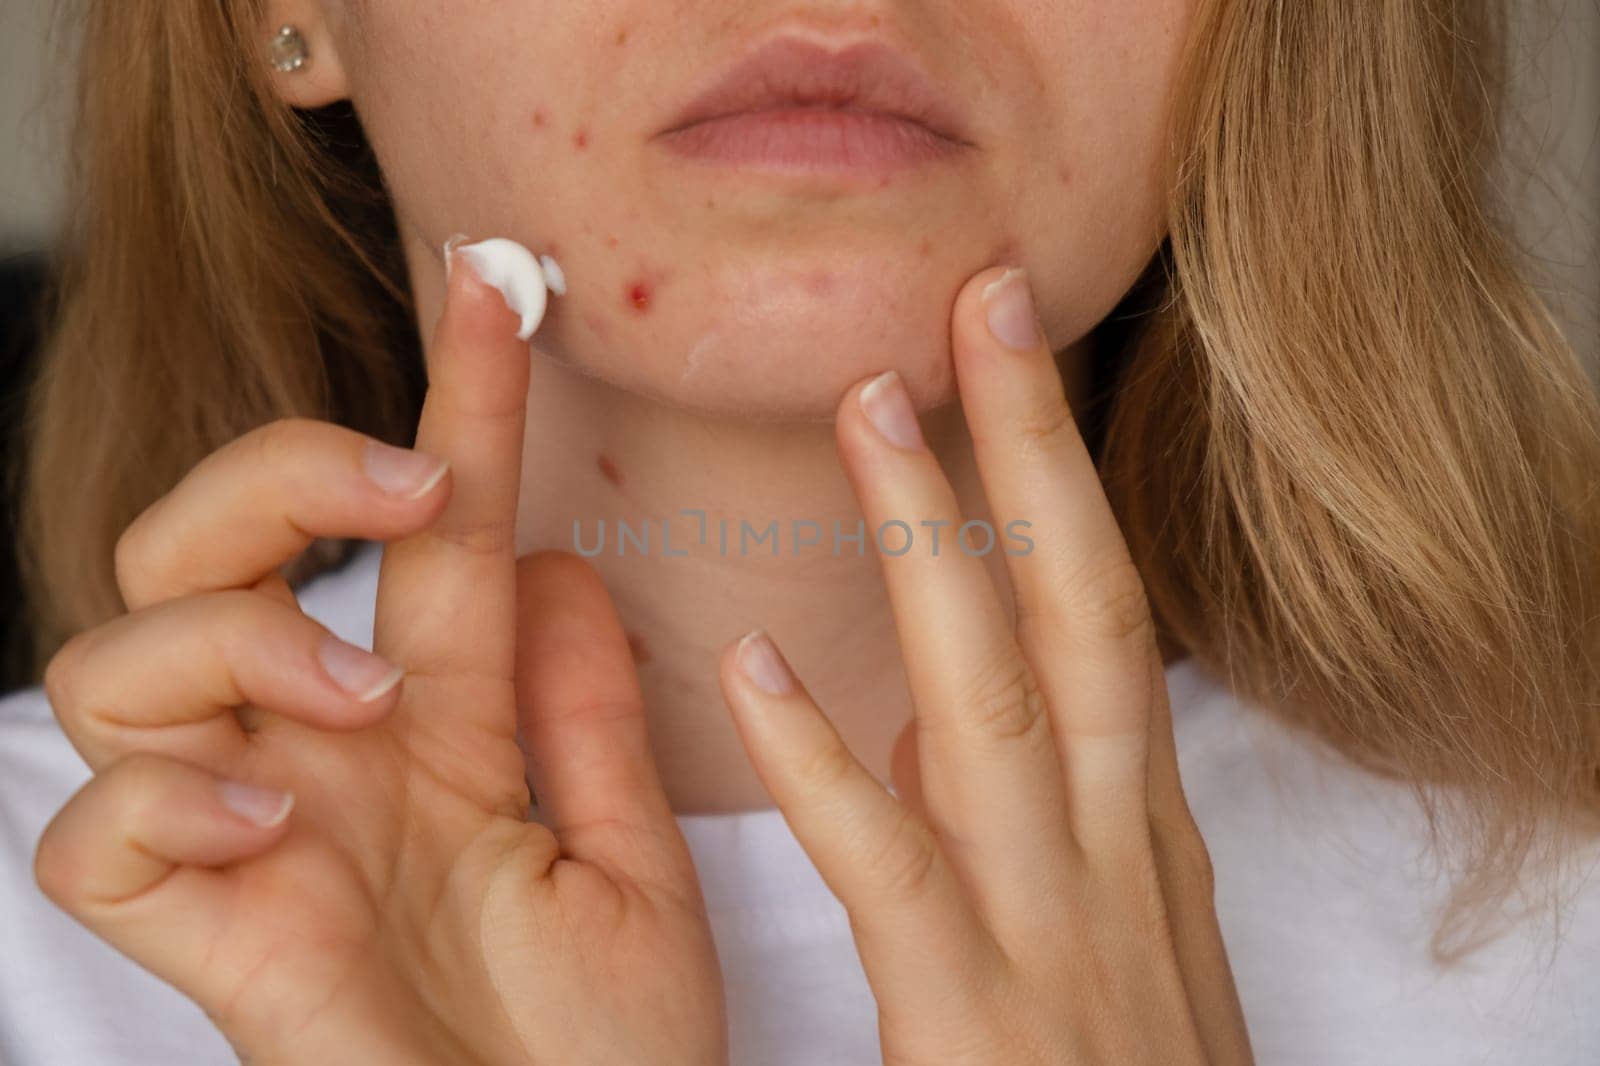 Unrecognizable woman applies makeup, cream serum cure for acne on face. Close-up acne on woman's face with rash skin ,scar and spot that allergic to cosmetics. Problem skincare and health concept. Wrinkles, melasma, dark spots, freckles, dry skin, acne blackheads on face middle age women chin acne problem. pimples on the beard. problem skin in a young girl. hormonal misbalance. Skin disorders lead to depression and insecurities in women